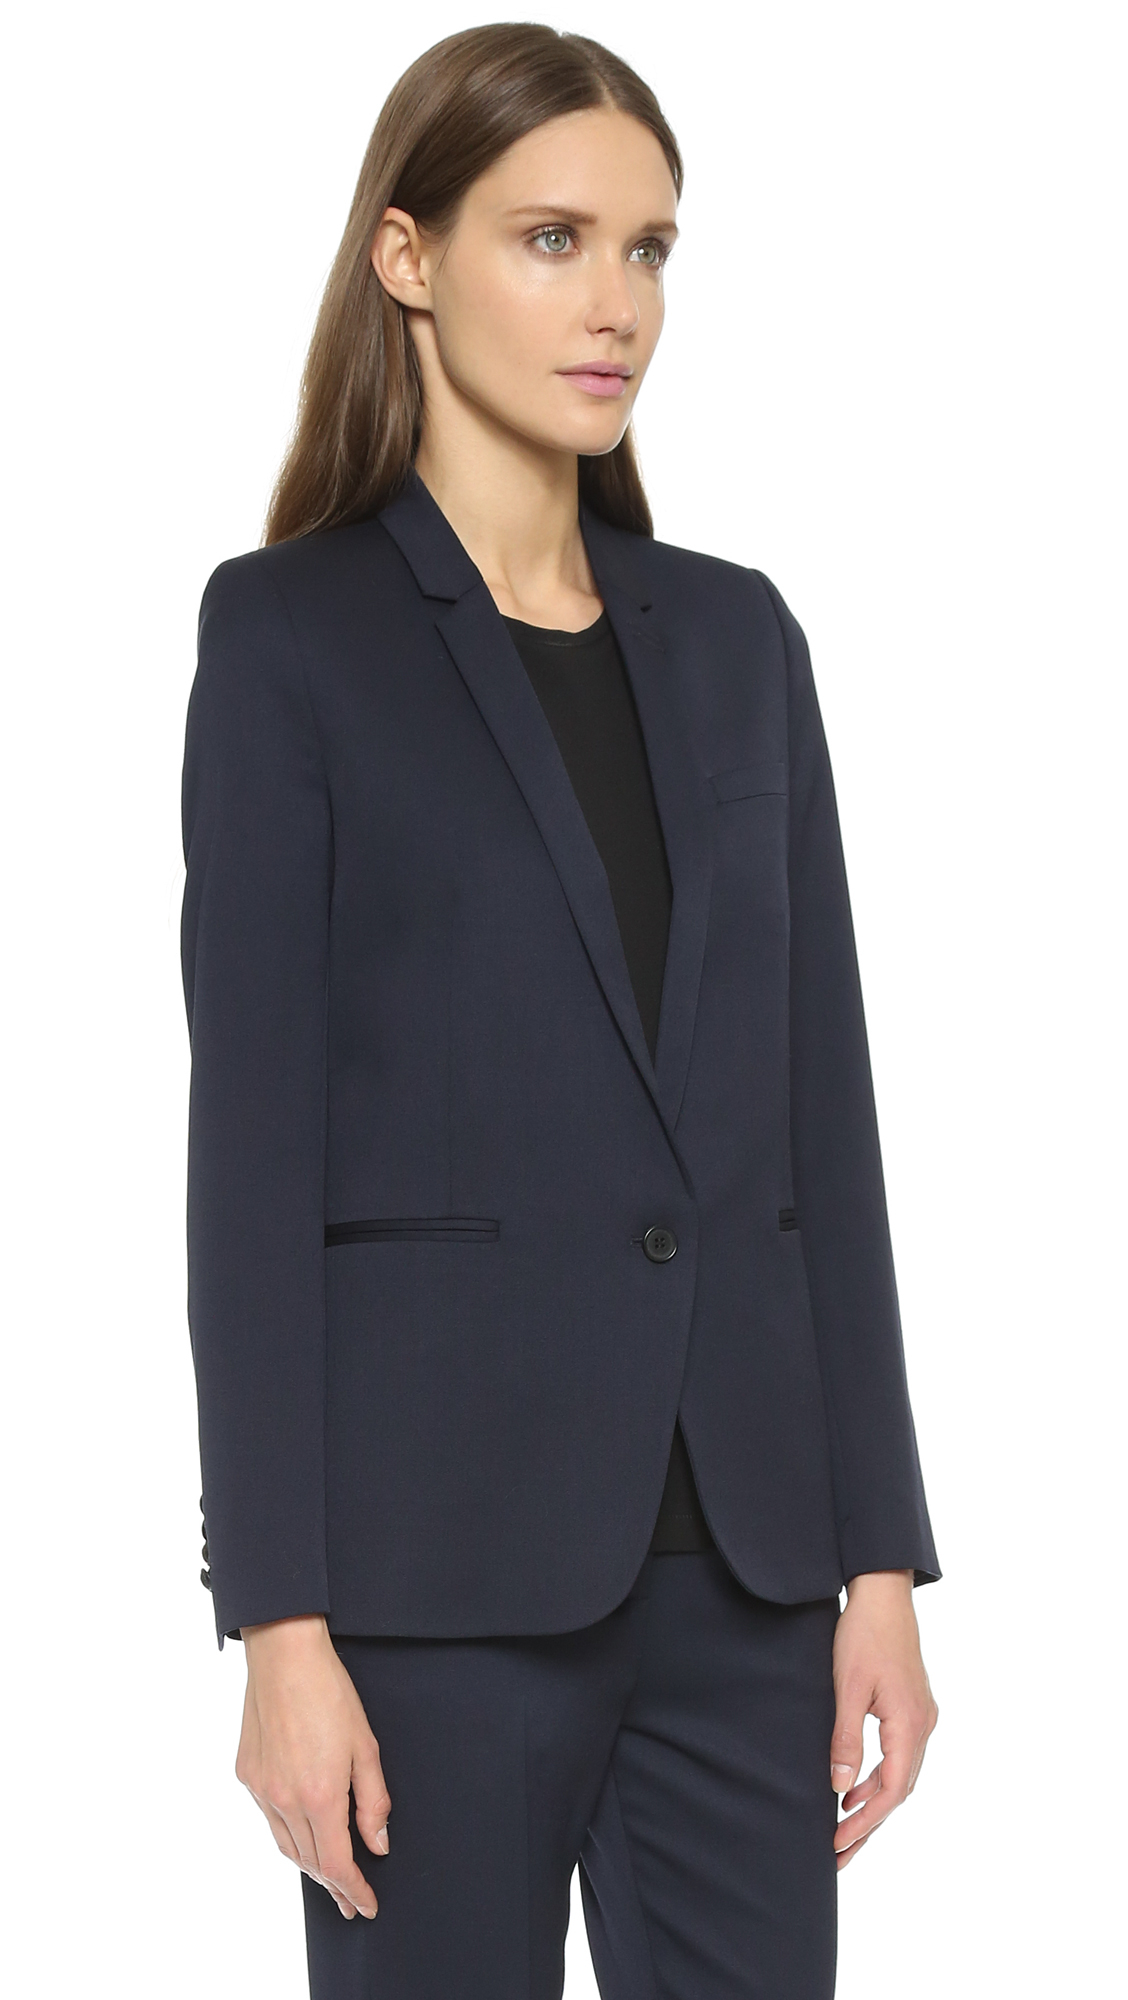 Lyst - The Kooples Timeless Suit Jacket - Navy in Blue